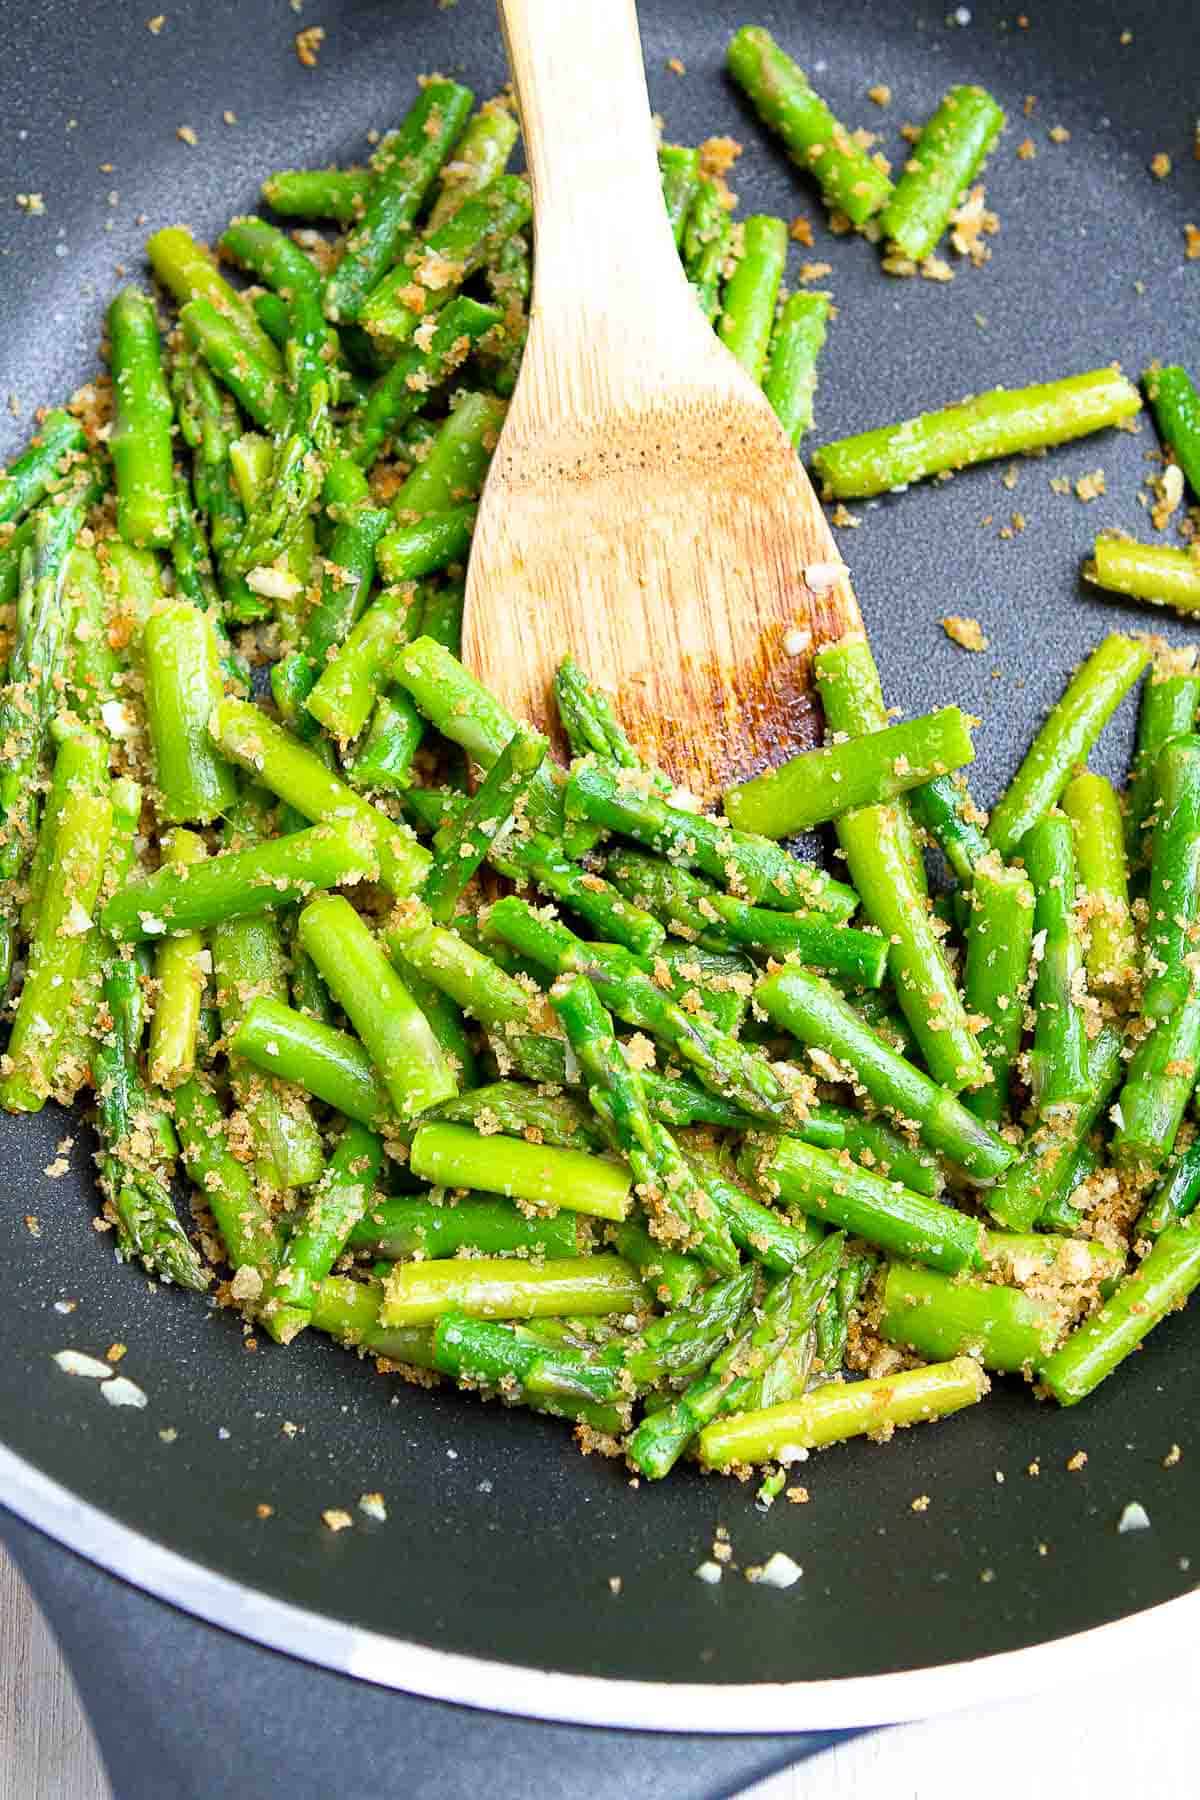 Pieces of sauteed asparagus with garlic breadcrumbs in a large nonstick skillet.